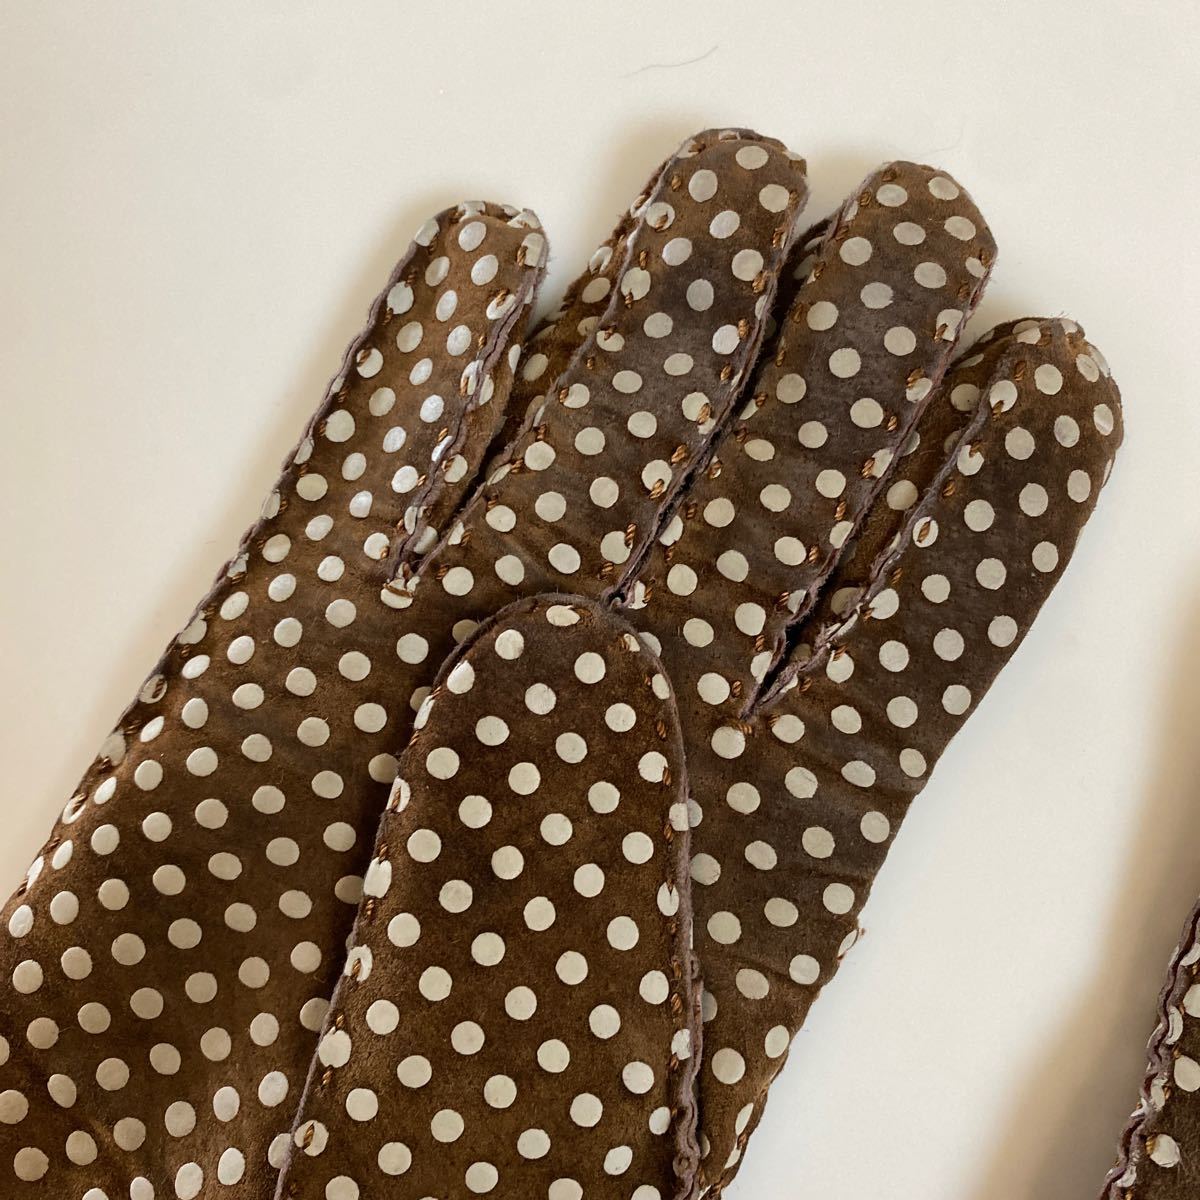  sale prompt decision 1 jpy cache*nezkashune dot pattern blow b gloves polka dot Brown lady's suede used 